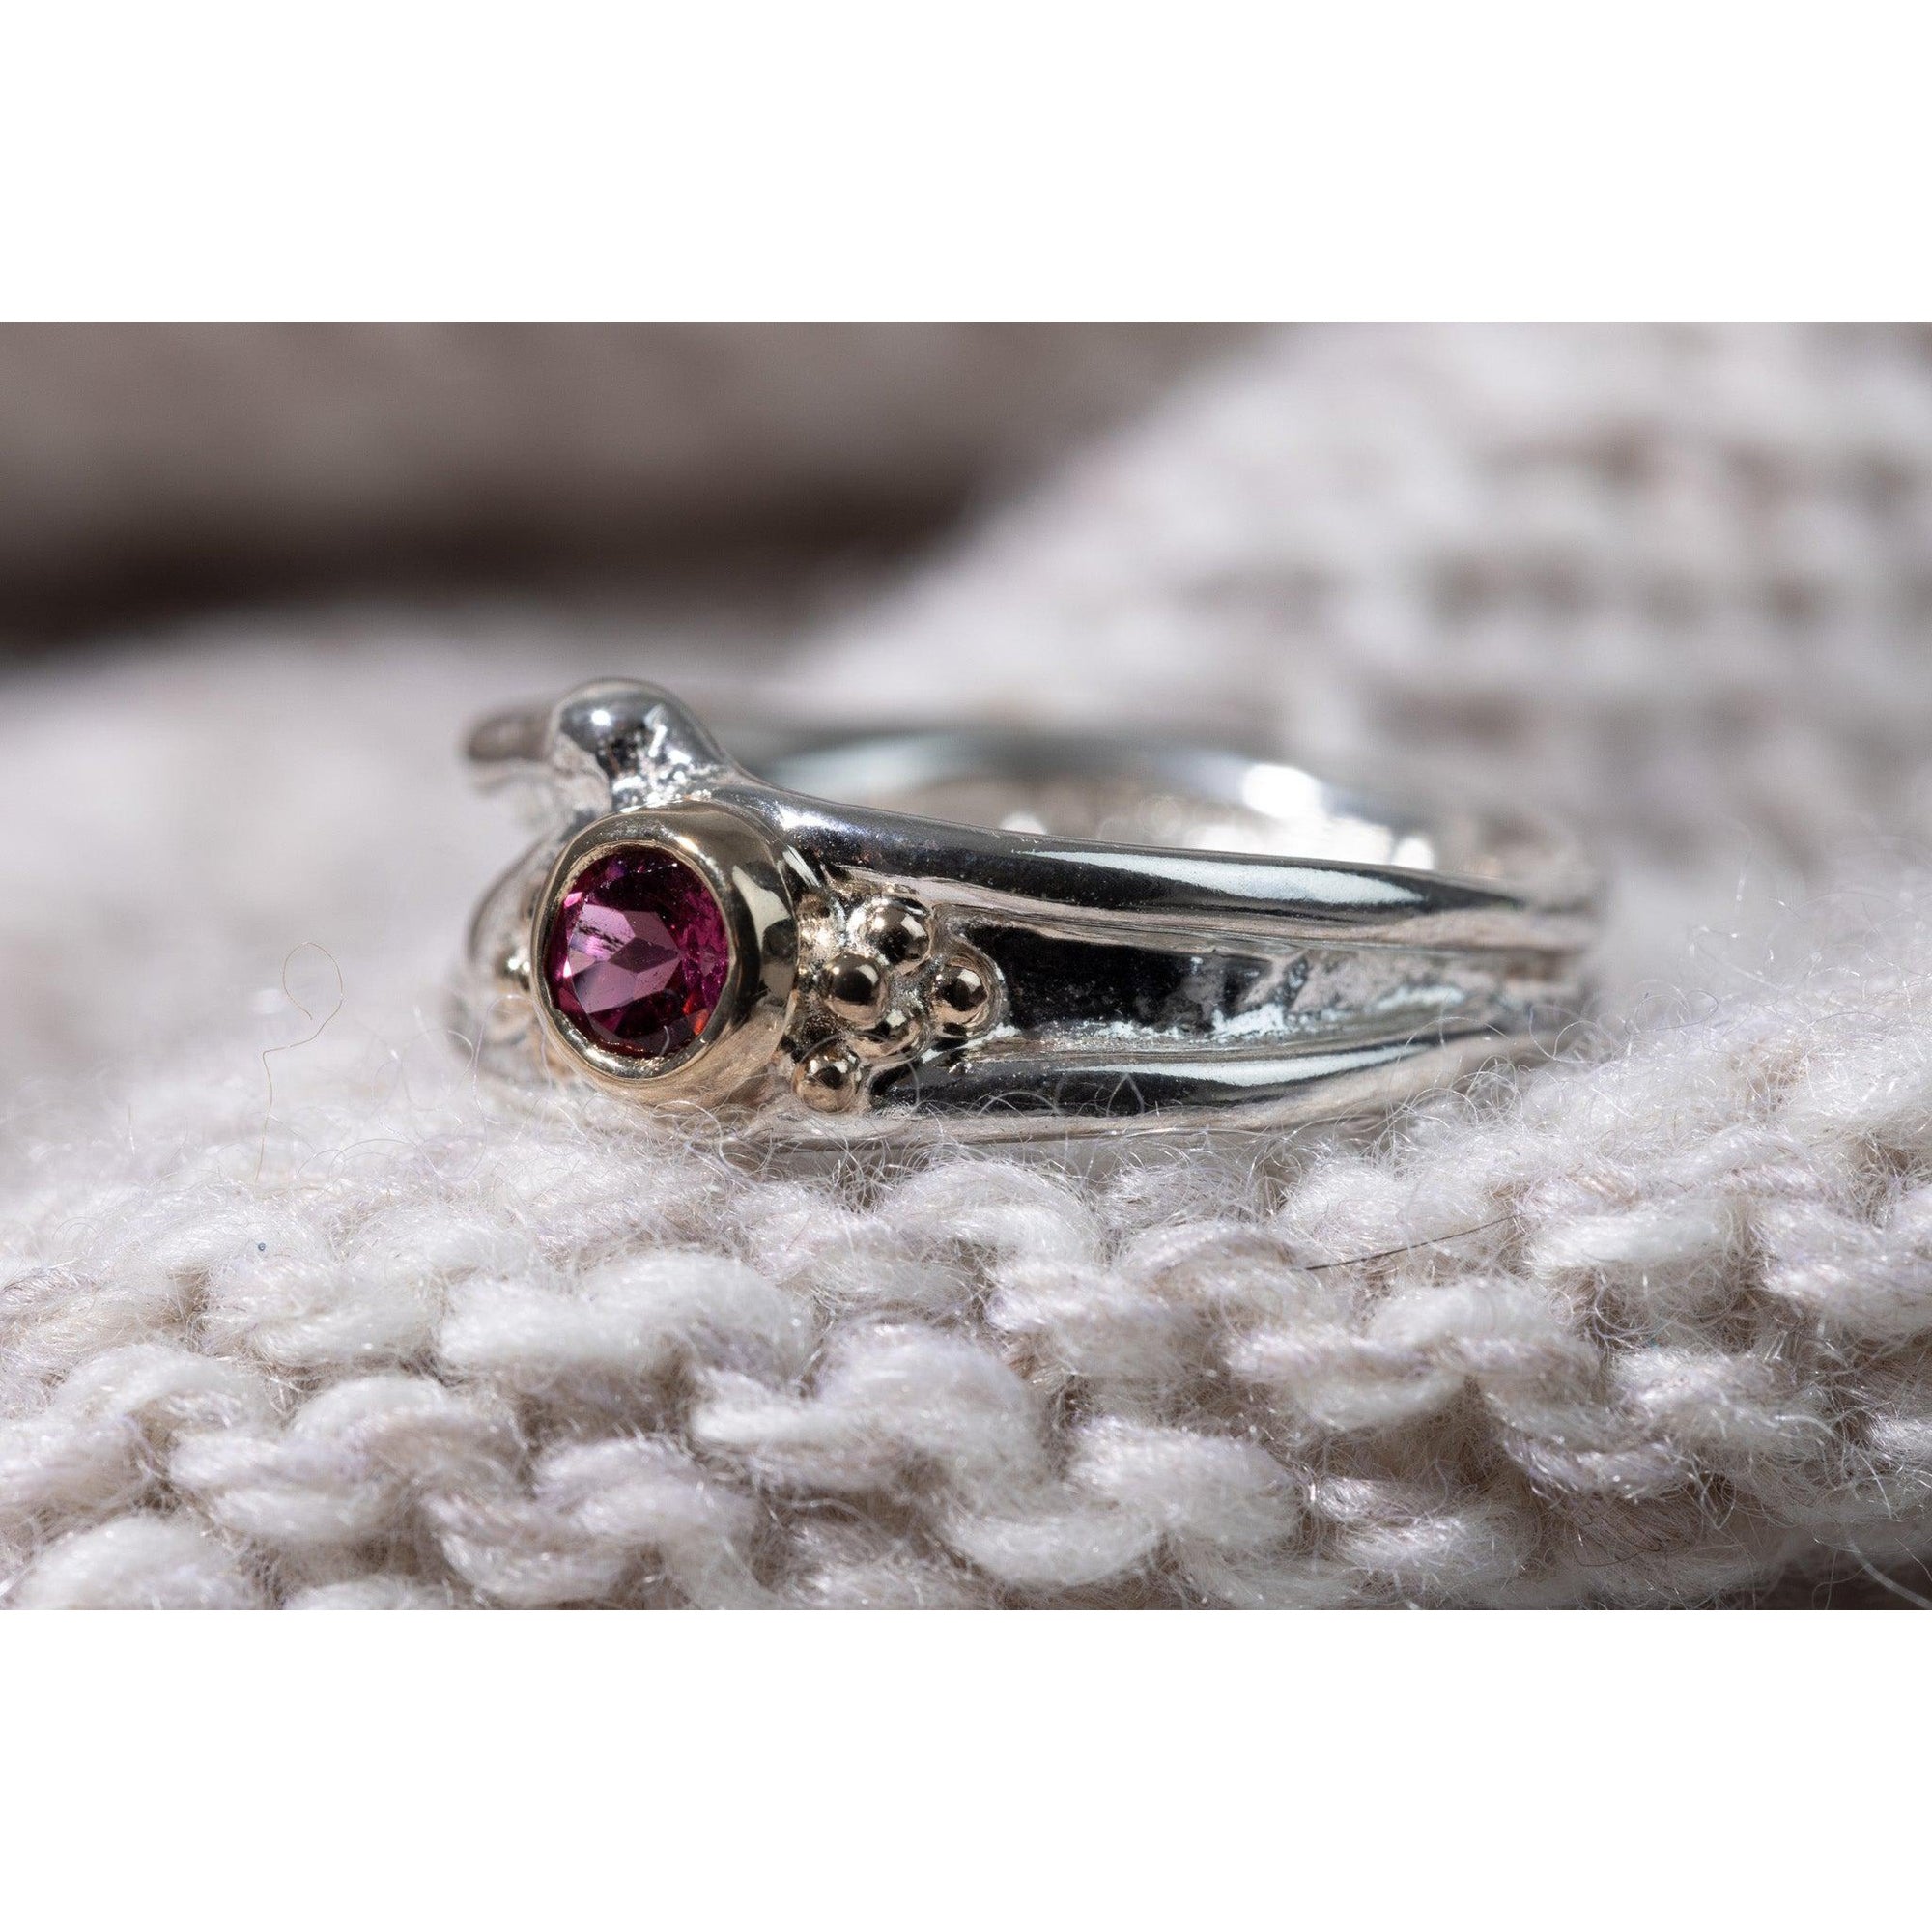 'LG58 - Silver Ring with 9ct Gold 4mm Rhodalite ' by Les Grimshaw, available at Padstow Gallery, Cornwall